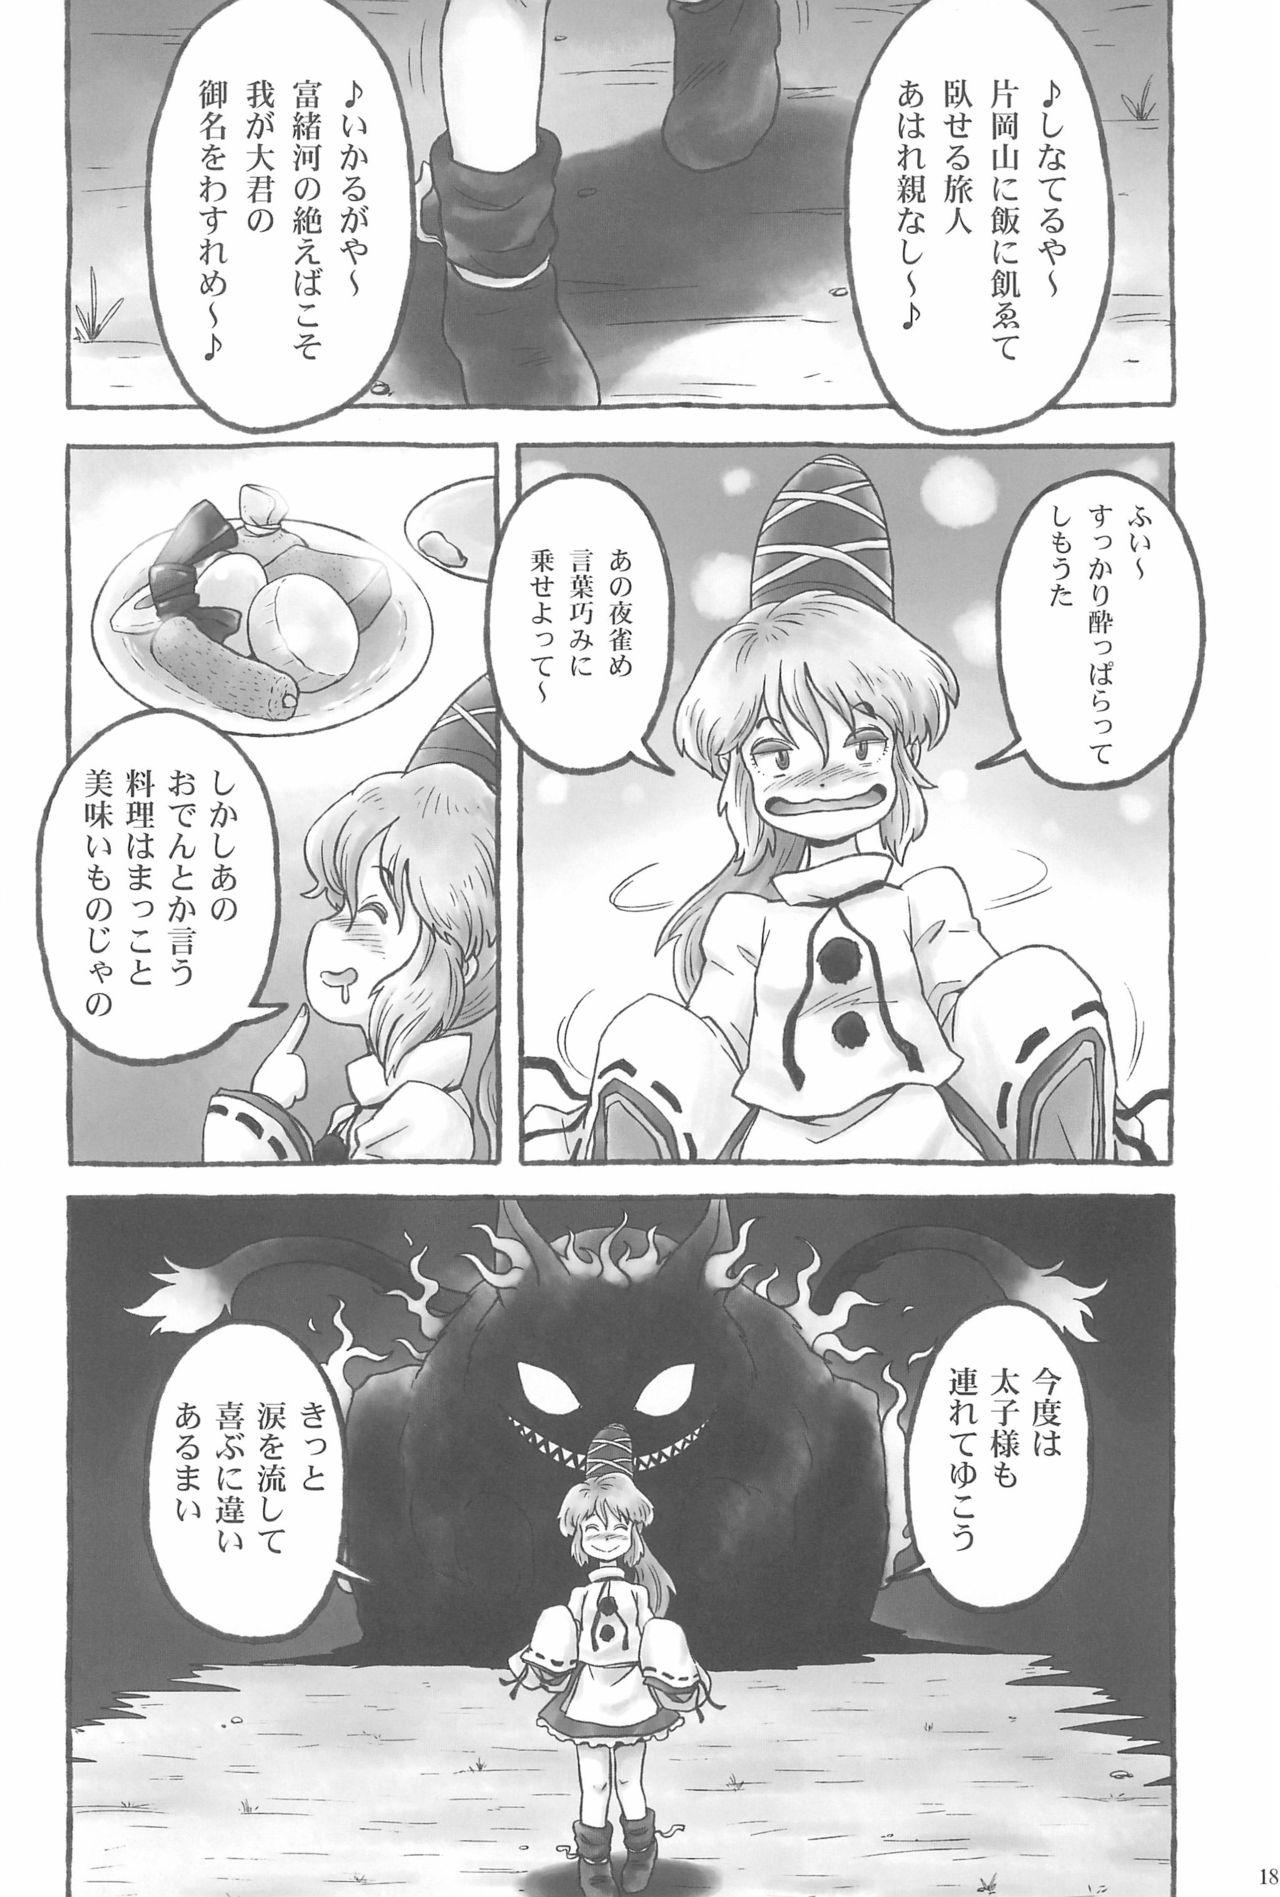 Touhou Roadkill Joint Publication 17